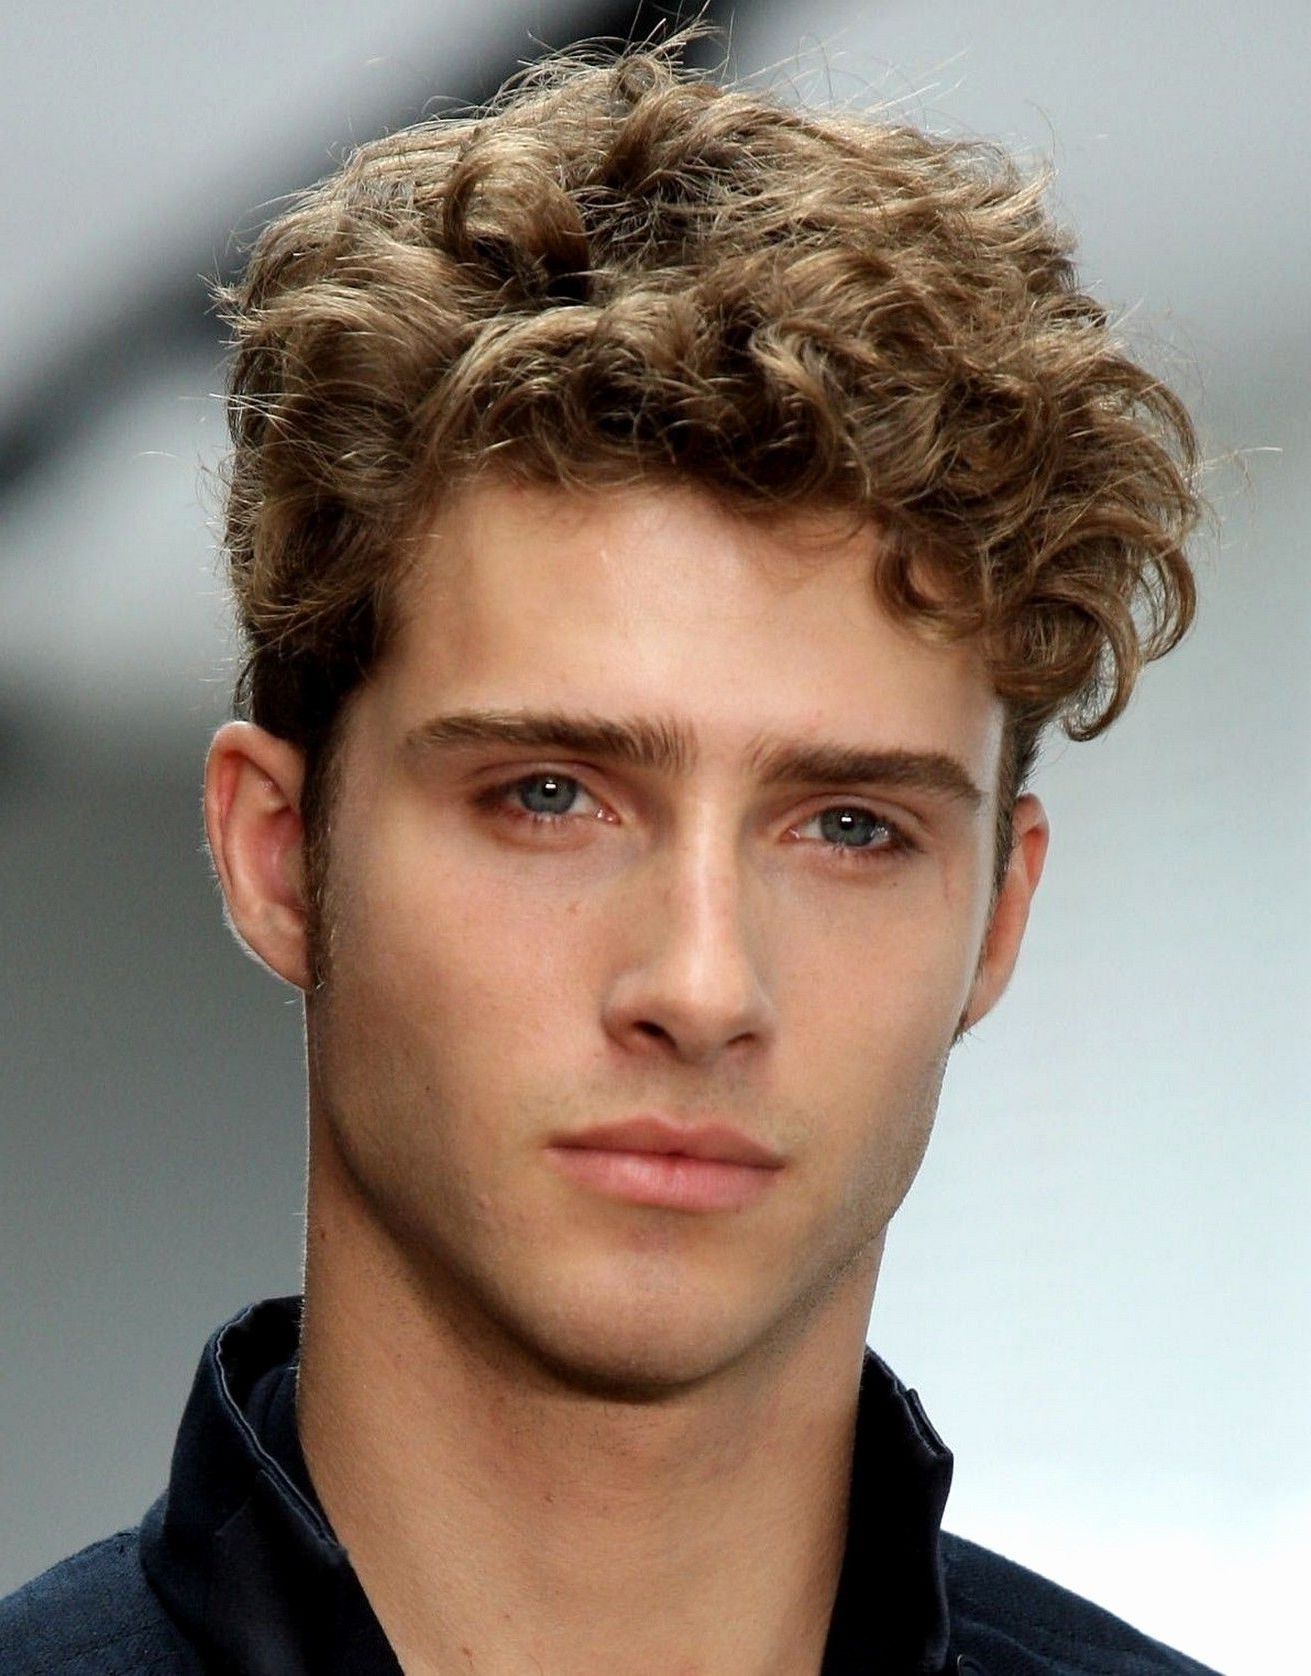 Fashion : A Perfect Hairstyles For Men With Curly Hair And Pertaining To Curly Hairstyles For Round Faces (View 8 of 20)